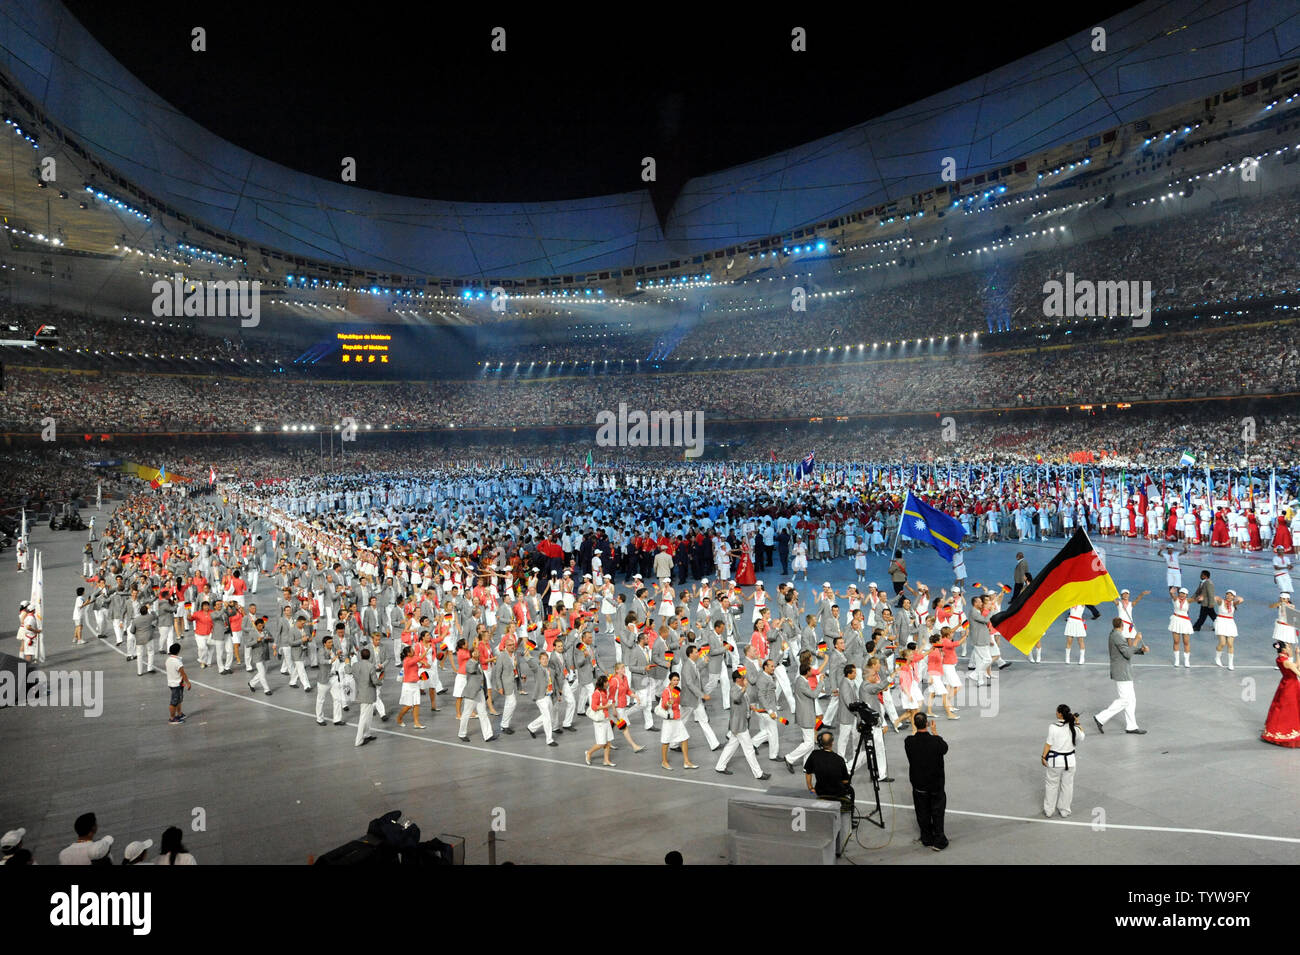 The German team marches into the National Stadium, called the Bird's Nest, during the Opening Ceremony of the 2008 Summer Olympics in Beijing on August 8, 2008.   The Summer Games will run through August 24, 2008.   (UPI Photo/Pat Benic)  REPEAT Stock Photo